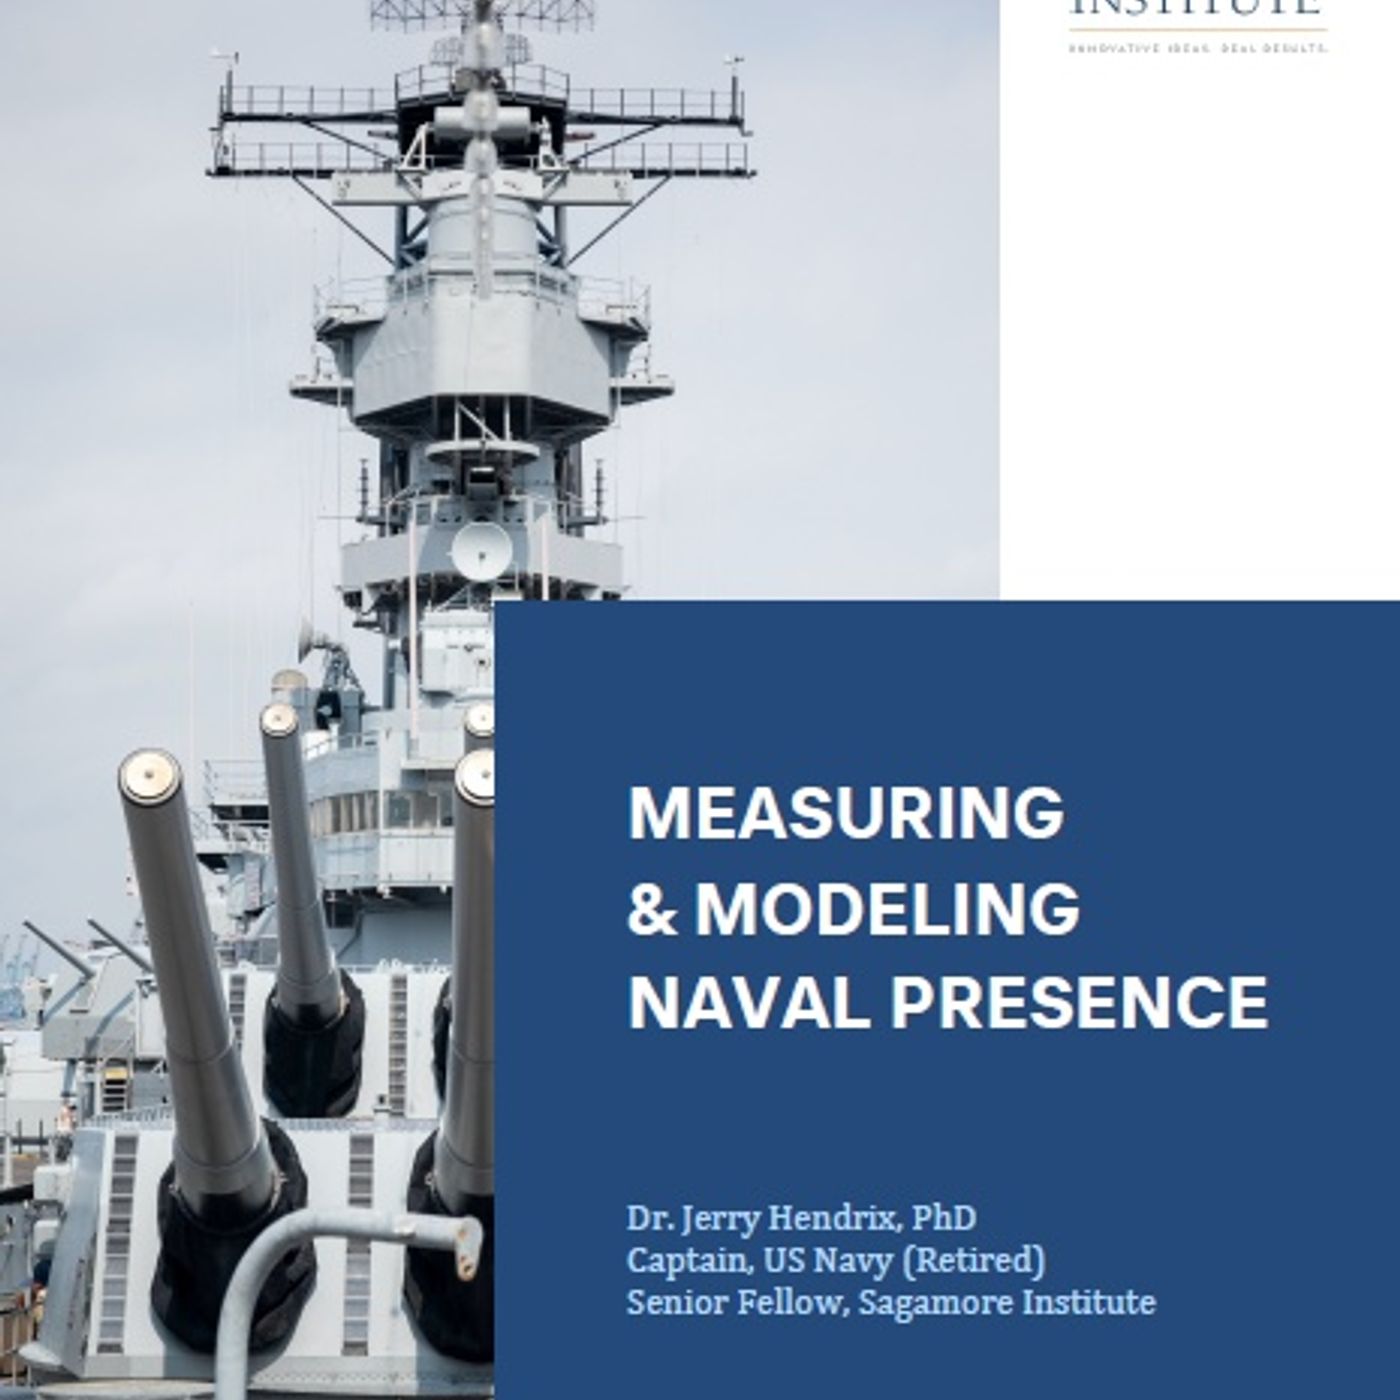 Episode 671: Measuring & Modeling the Naval Presence Mission with Jerry Hendrix